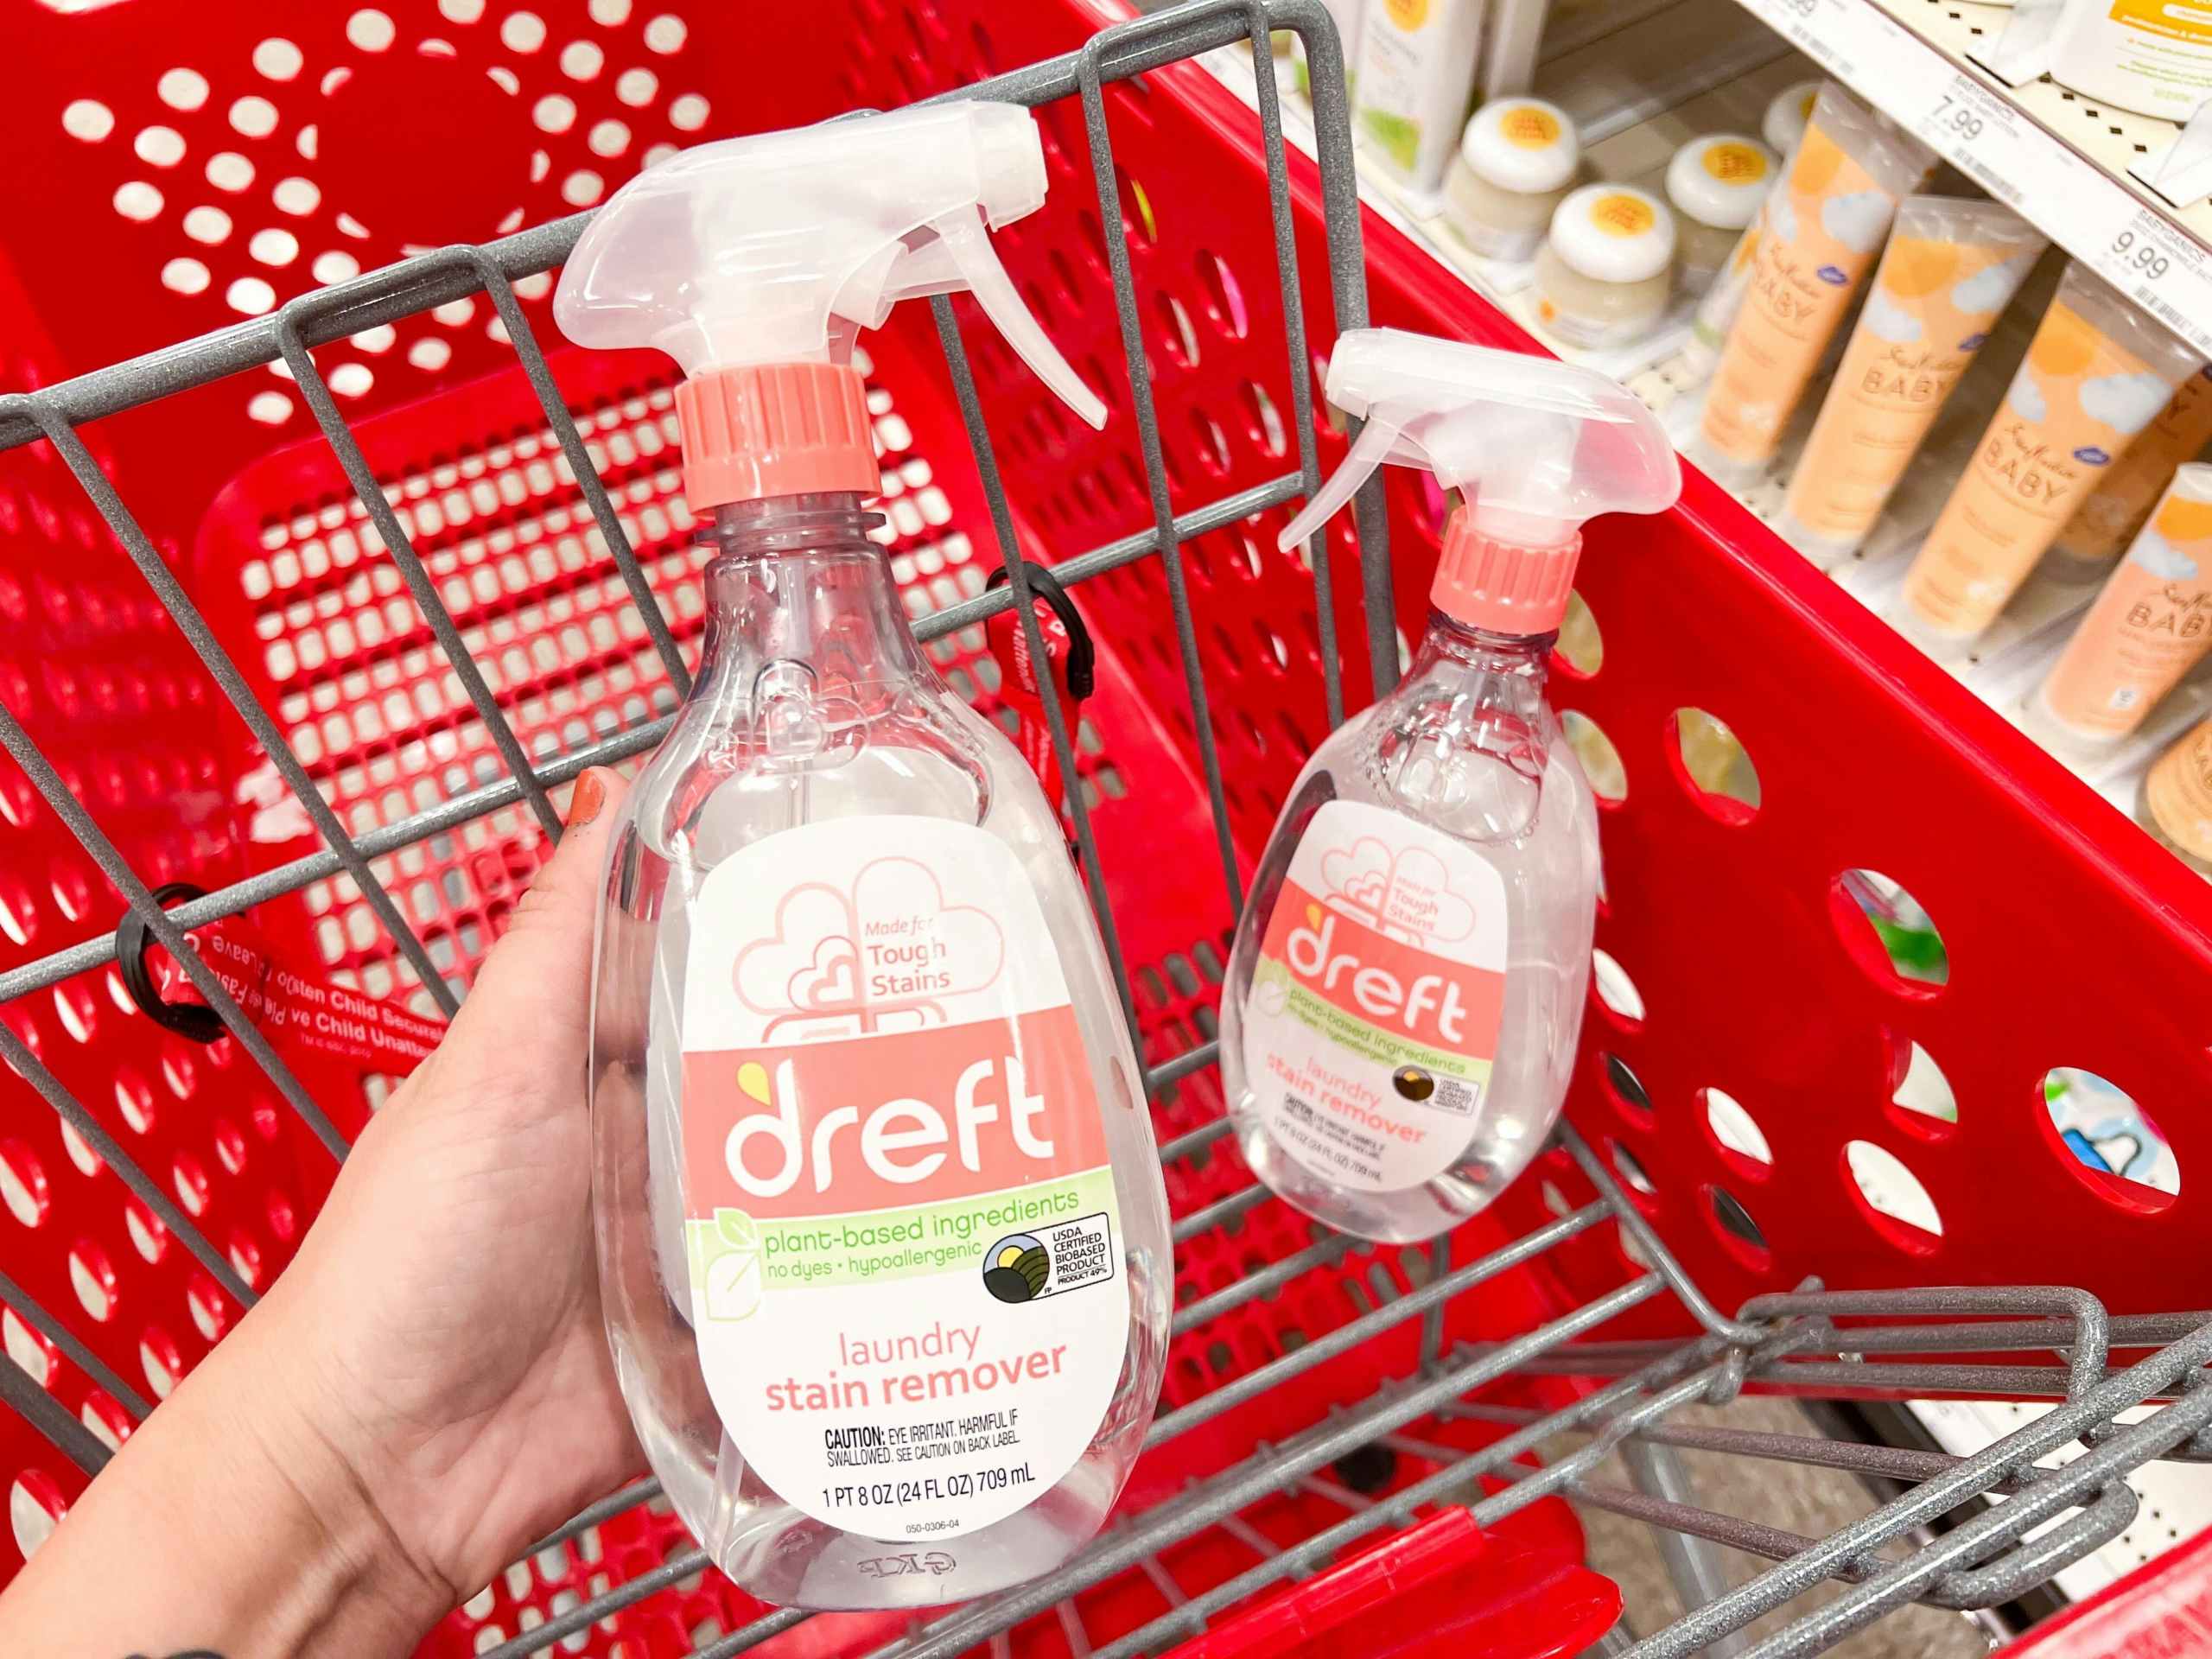 hand holding a bottle of dreft laundry stain remover over a target cart